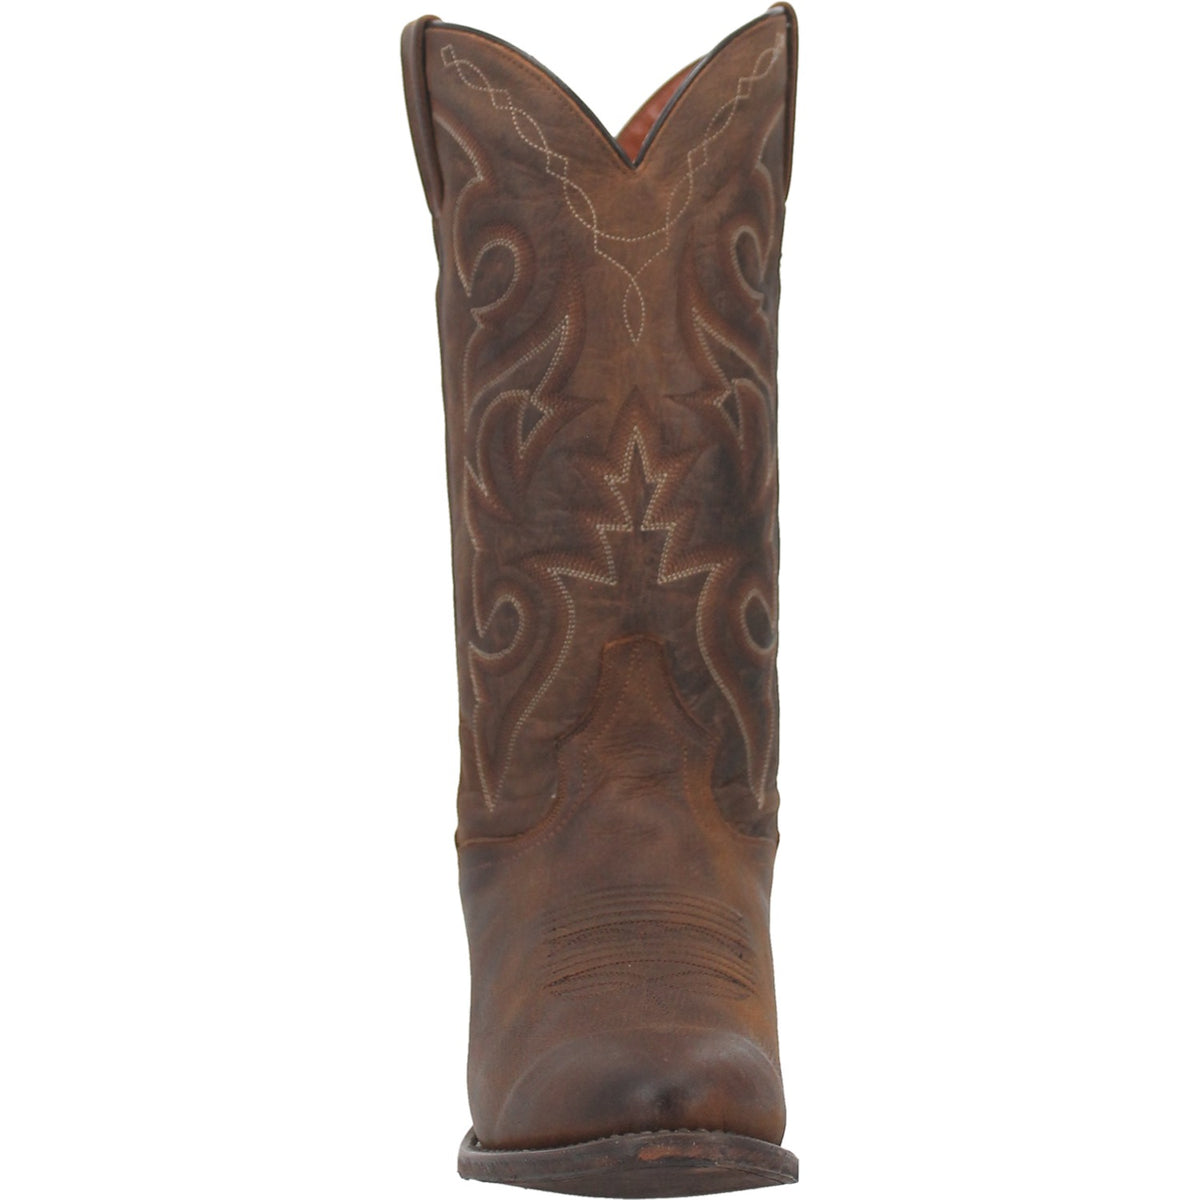 RENEGADE LEATHER BOOT Cover